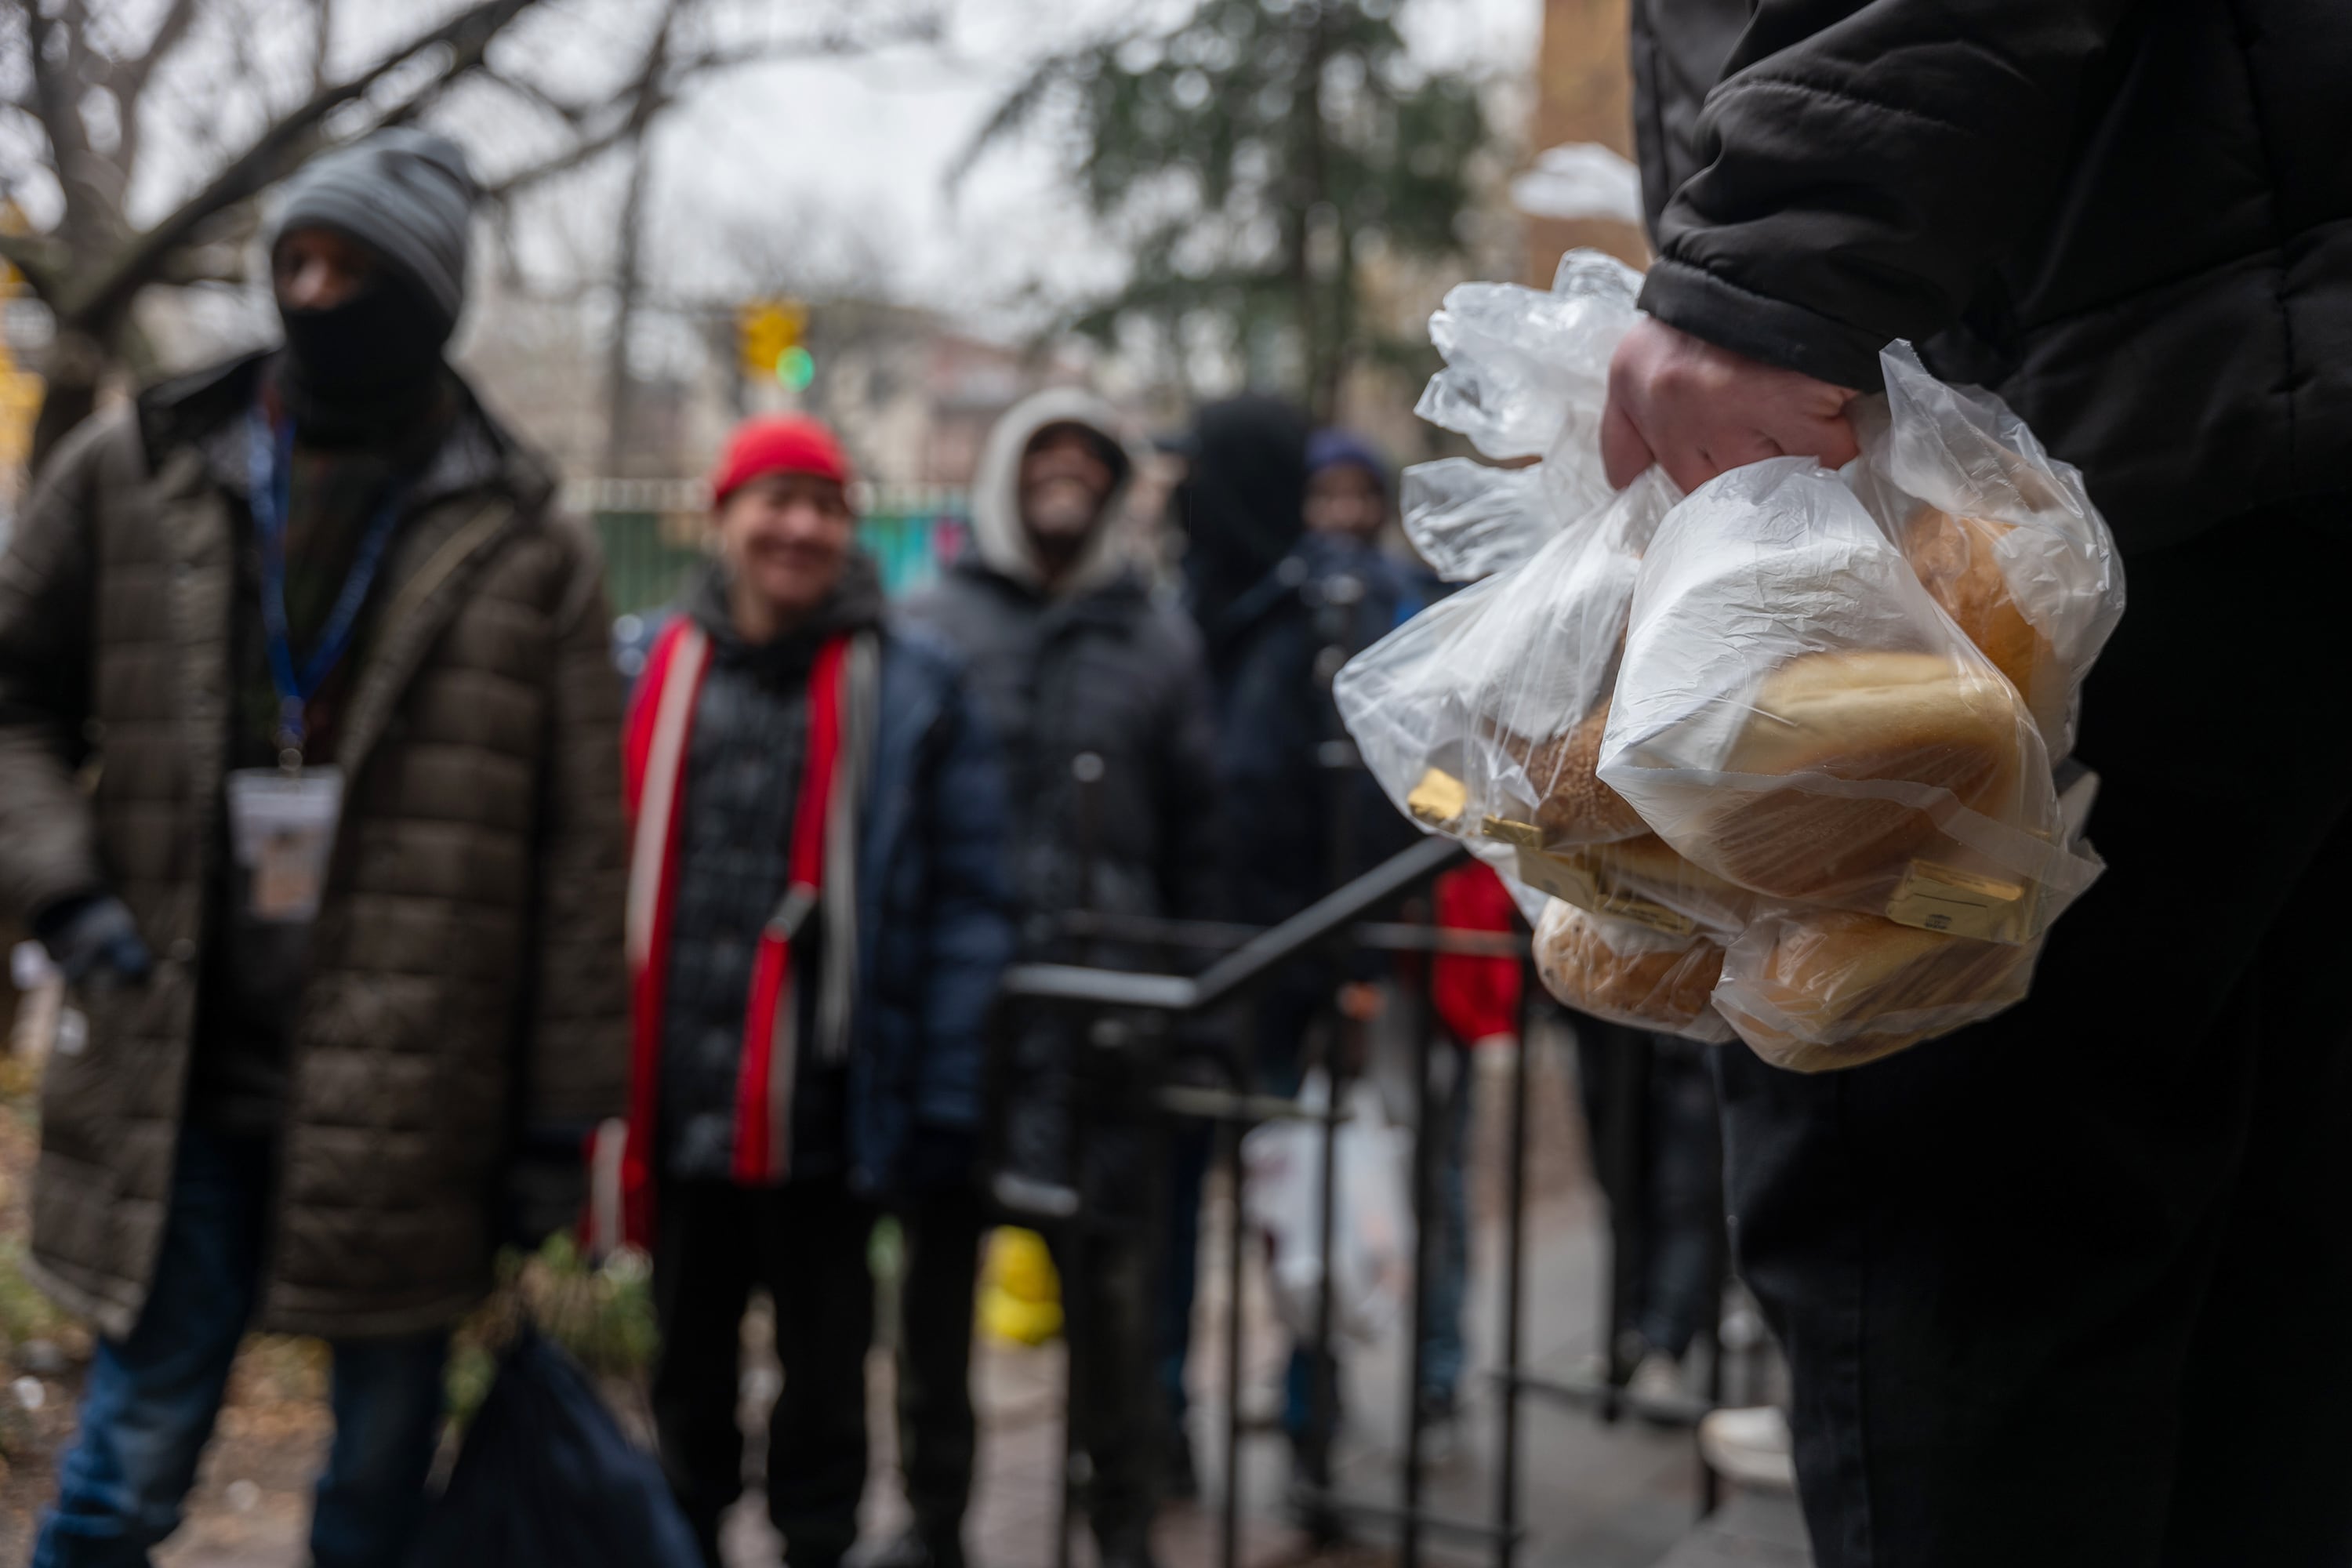 In focus is a hand holding bags full of bread with an out-of-focus line of people wearing winter clothing.